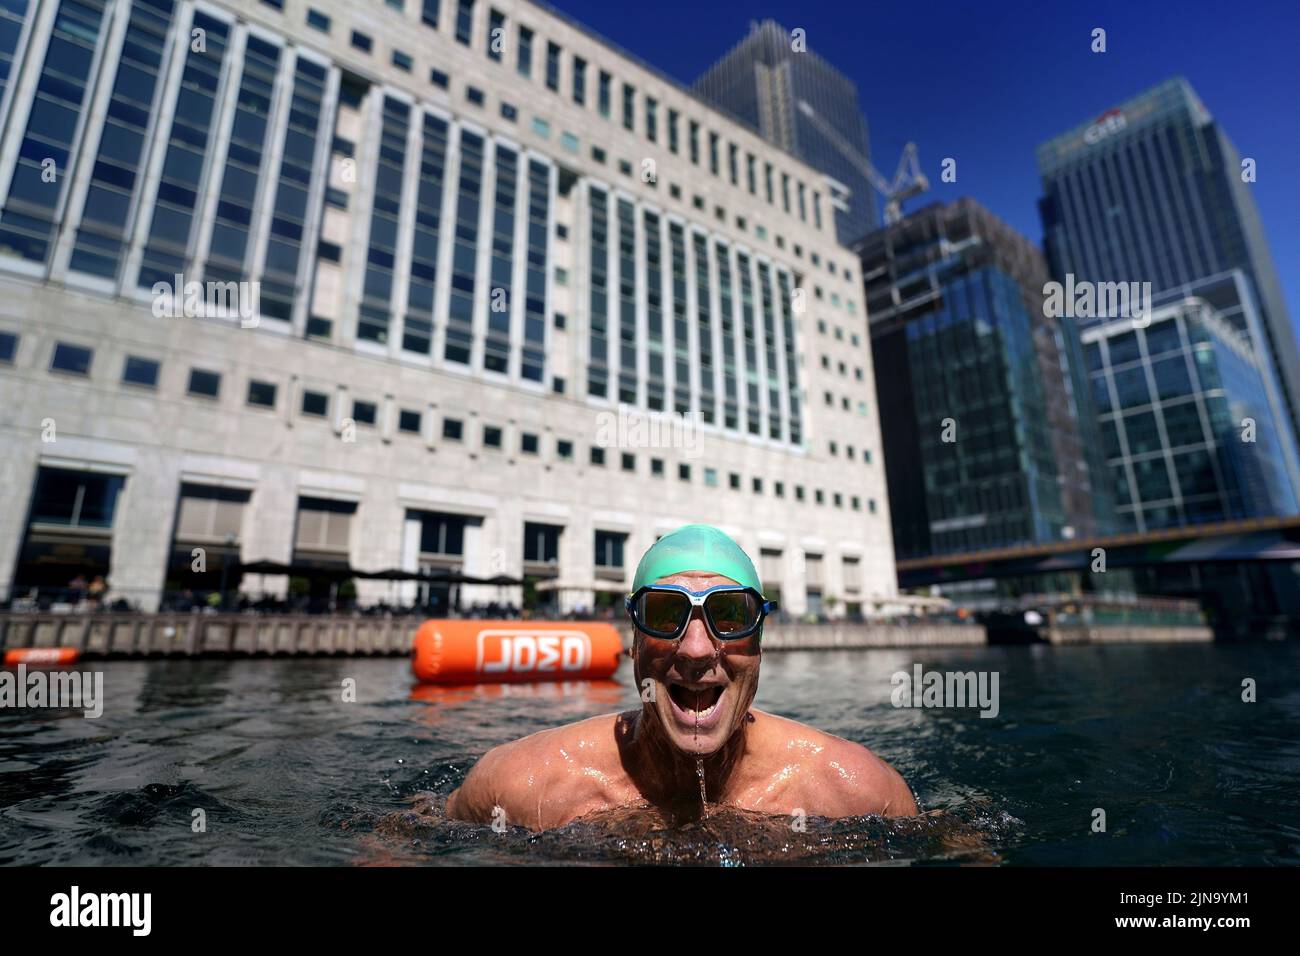 A swimmer in the new open water swimming venue in Canary Wharf during warm weather in east London. The Met Office has issued an amber warning for extreme heat covering four days from Thursday to Sunday for parts of England and Wales as a new heatwave looms. Picture date: Wednesday August 10, 2022. Stock Photo